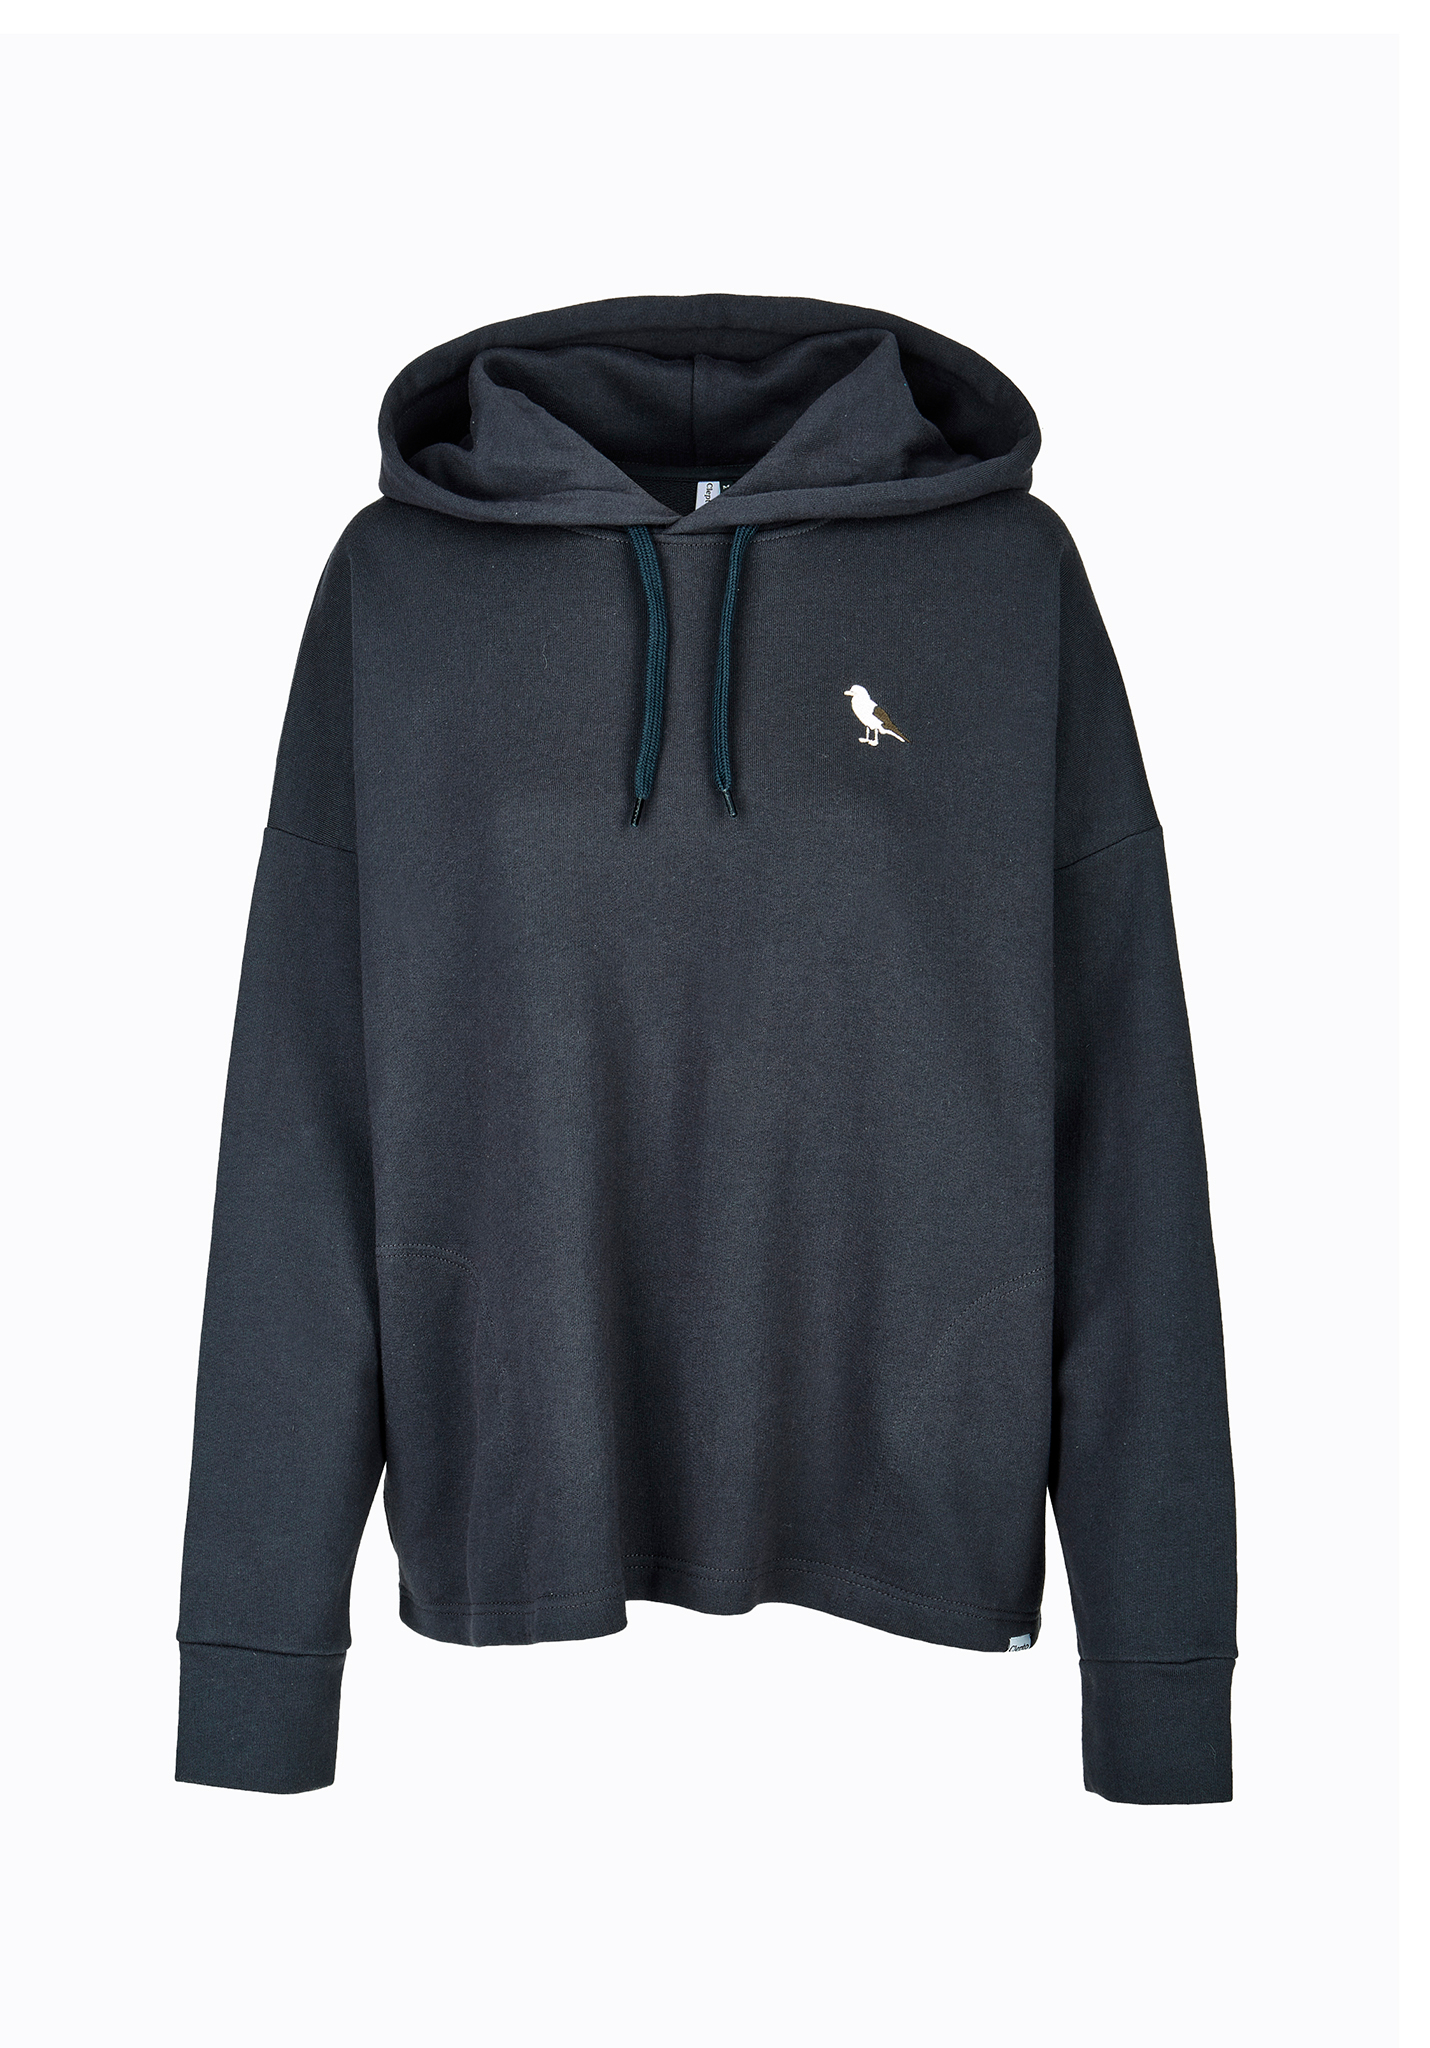 Cleptomanicx Embroidery Gull 2 Hoodies blue graphite XS